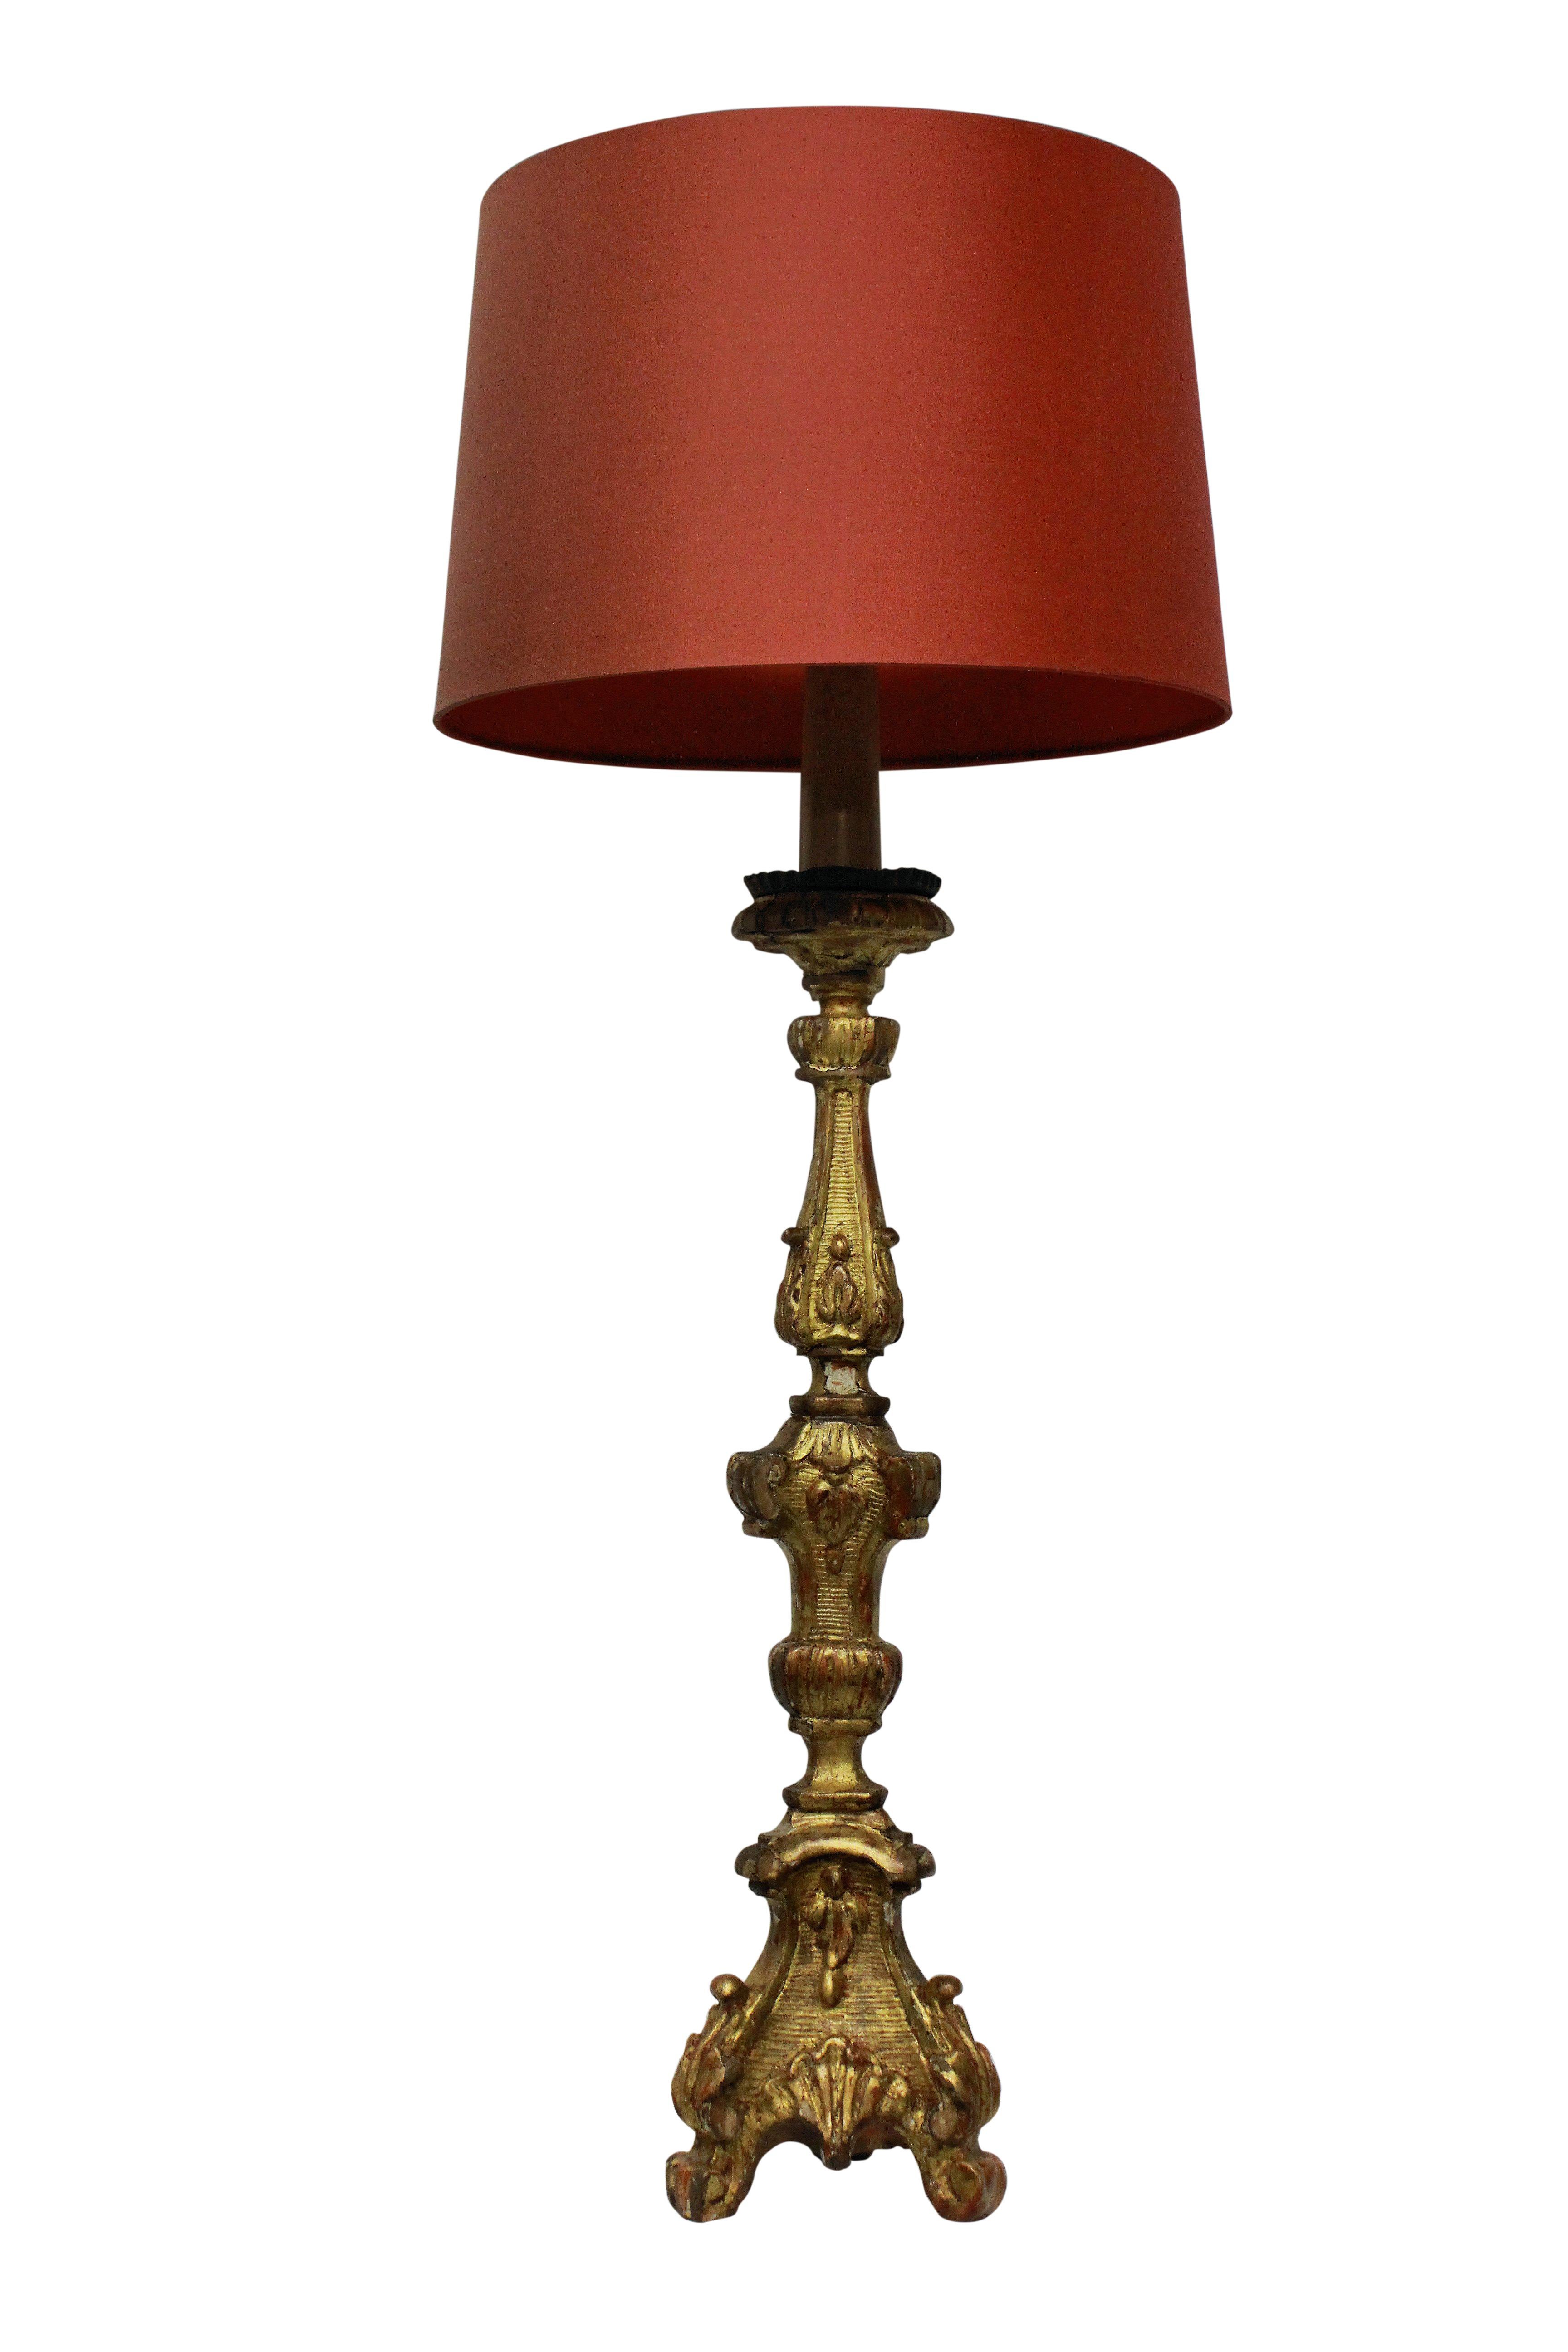 An Italian carved and water gilded Baroque candlestick now converted into a lamp.